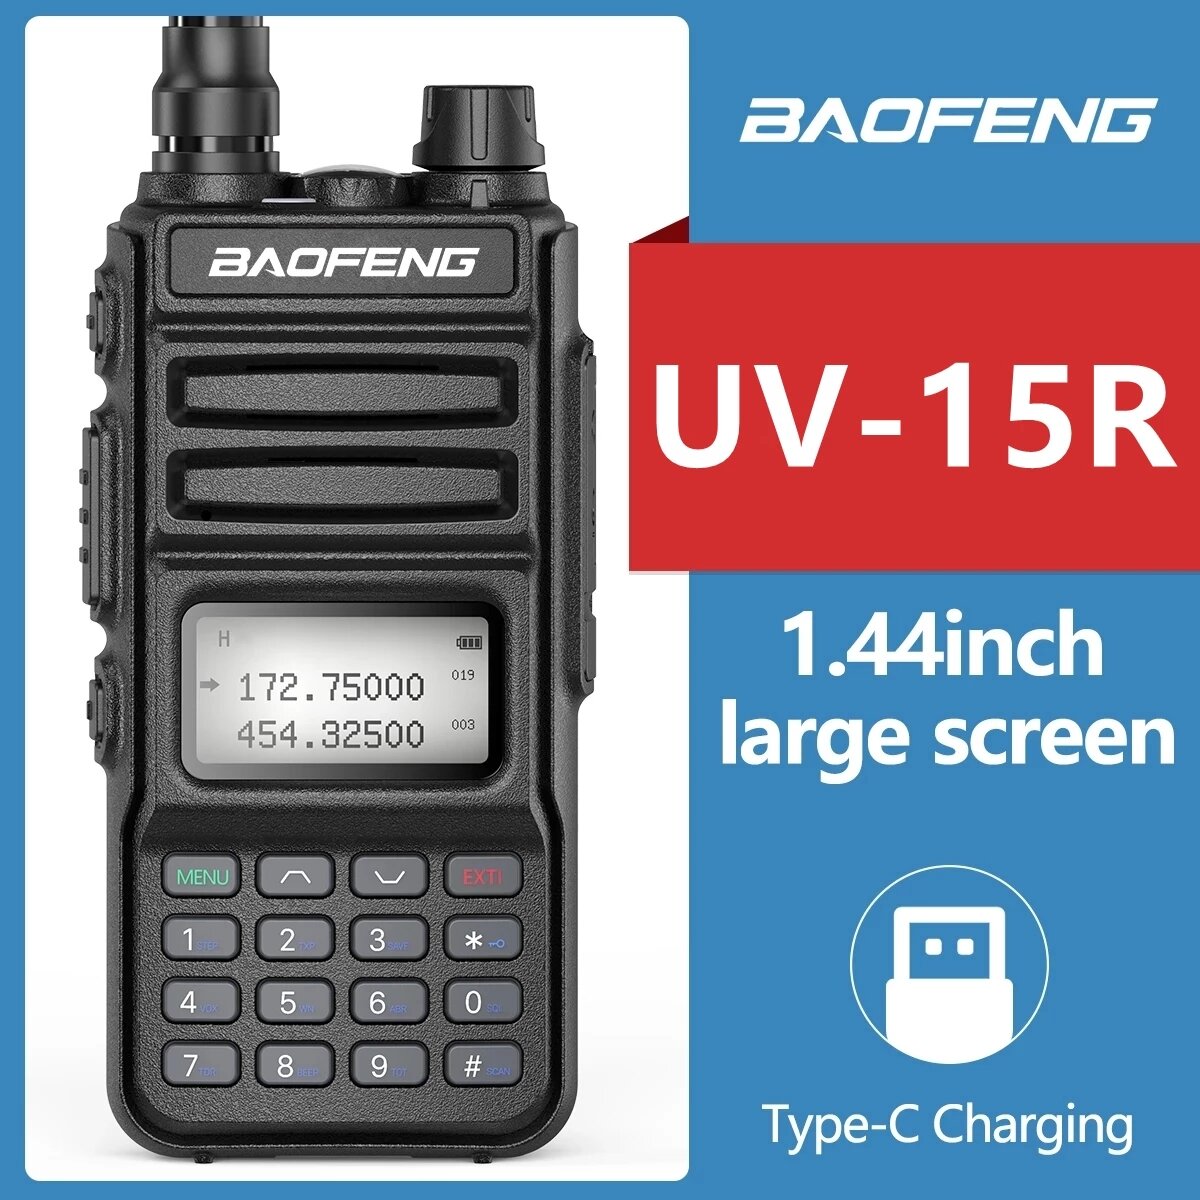 duck Do not stereo Baofeng UV-15R Walkie Talkie 10W High Power 999 Channels Dual Band UHF VHF  Radios Transmitter USB Charger Two Way Radio Sale - Banggood USA-arrival  notice-arrival notice